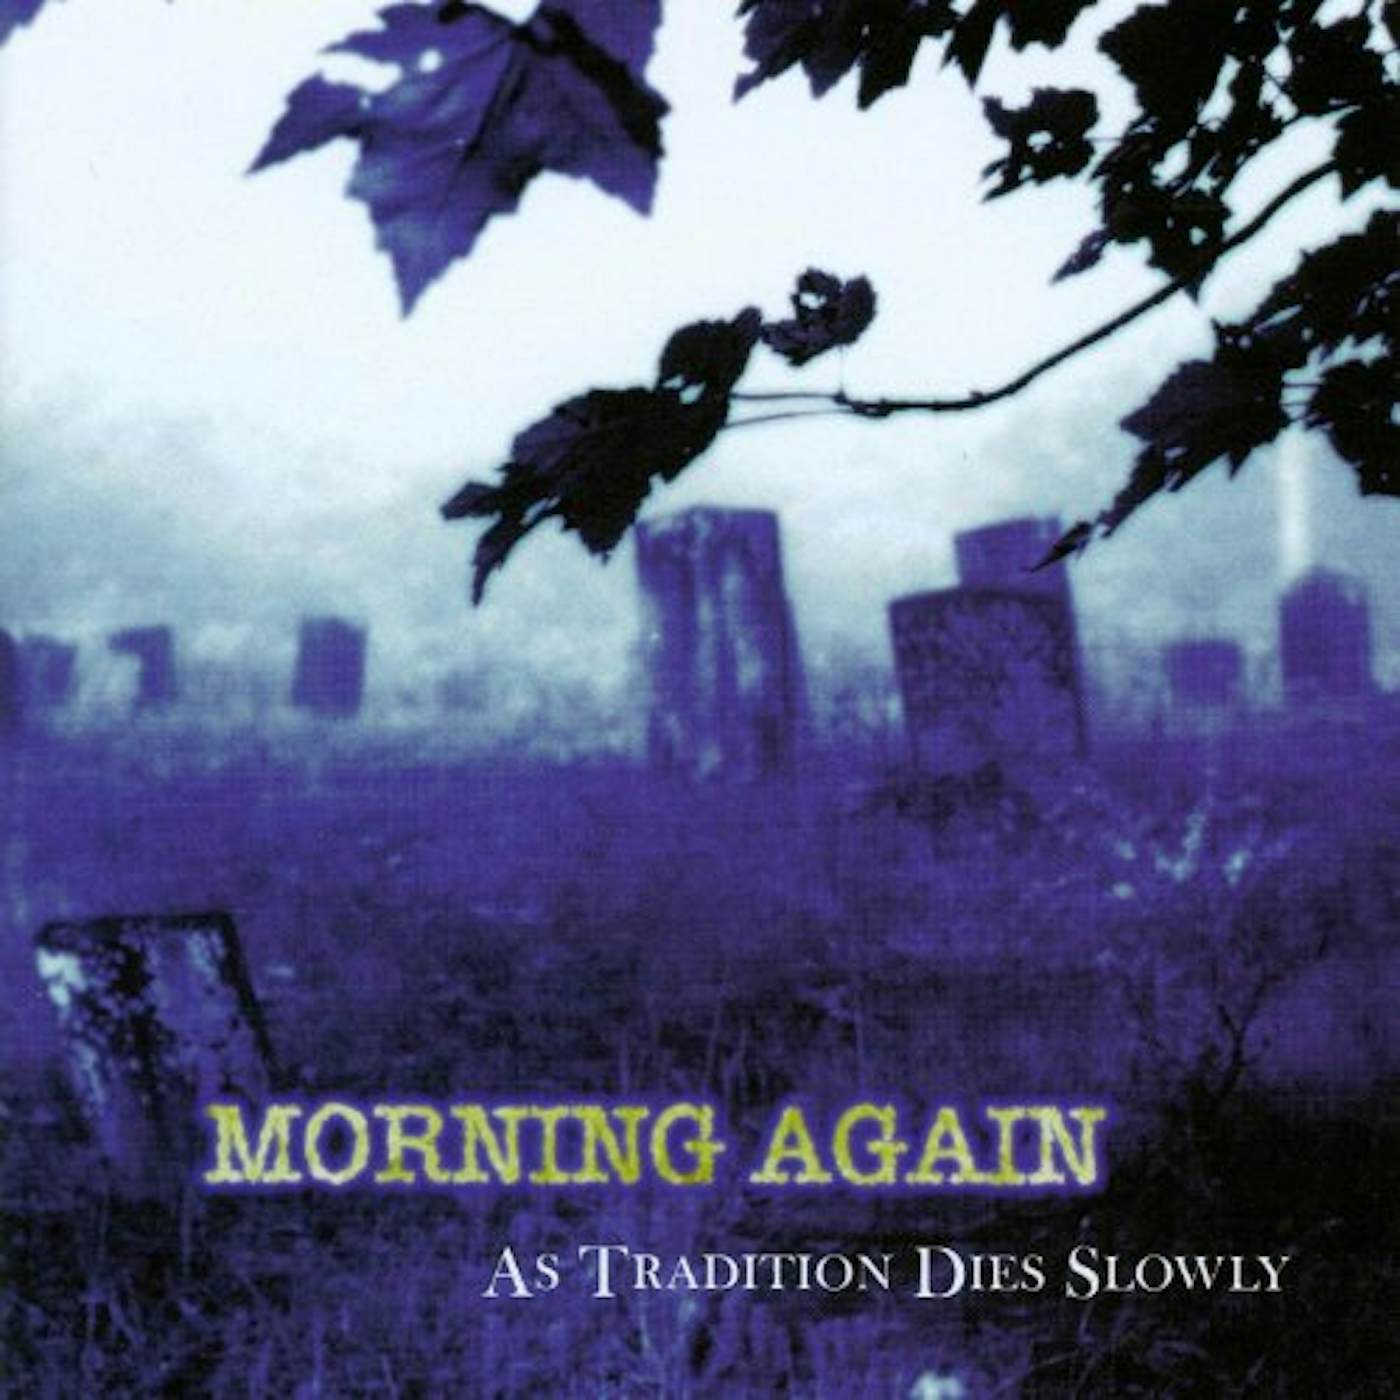 Morning Again As Tradition Dies Slowly Vinyl Record